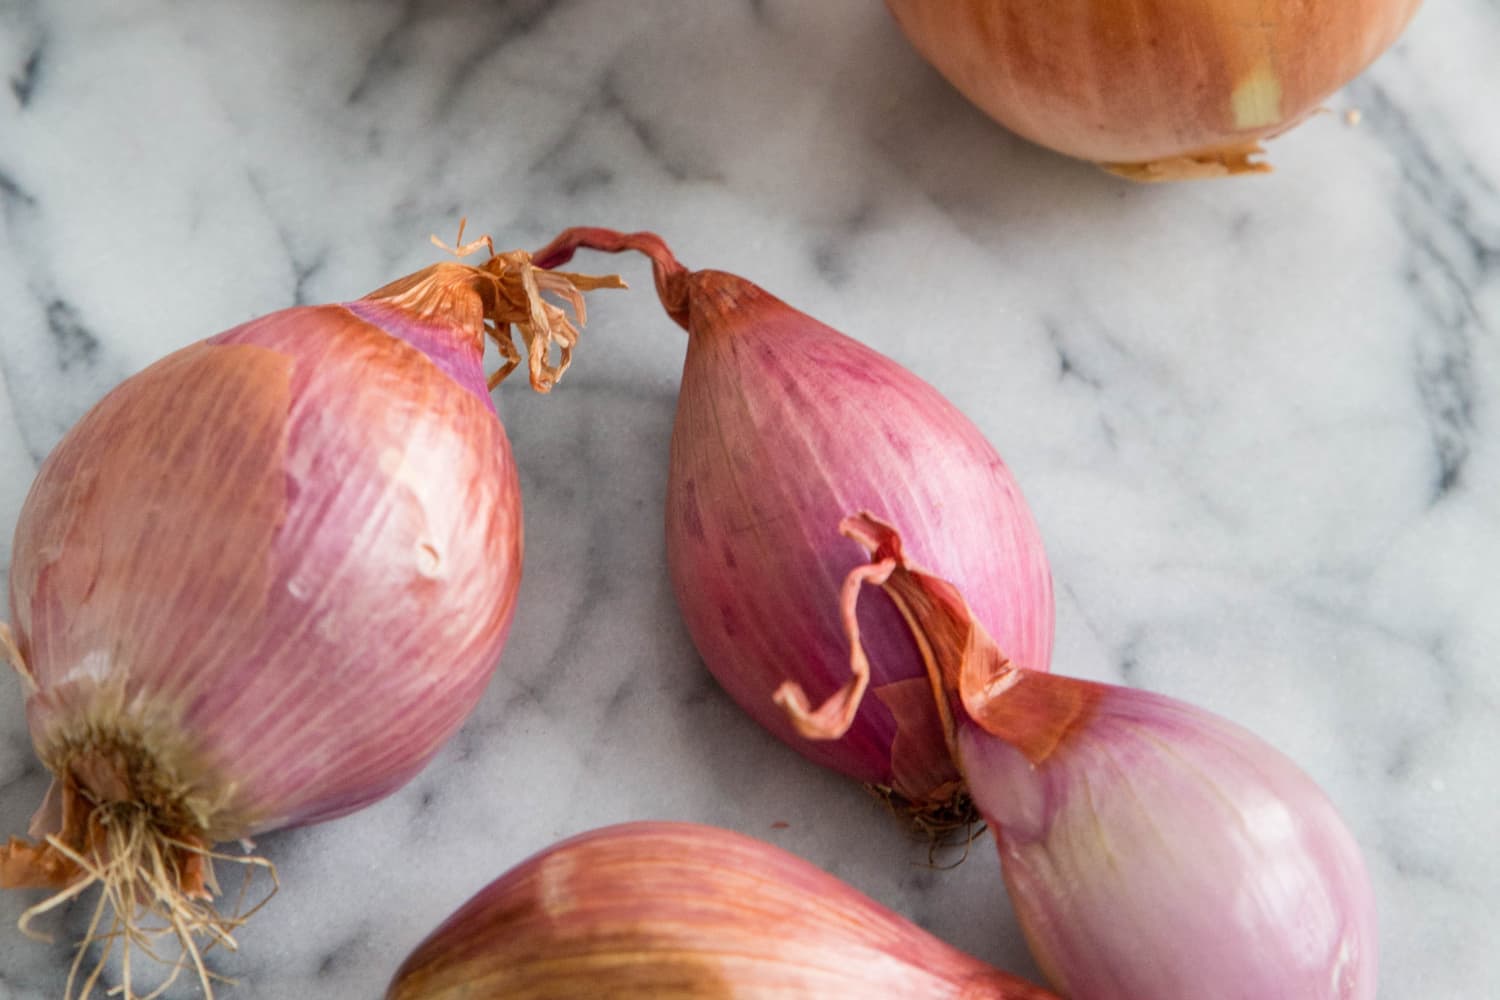 How to Swap Shallots for Onions - The Kitchn